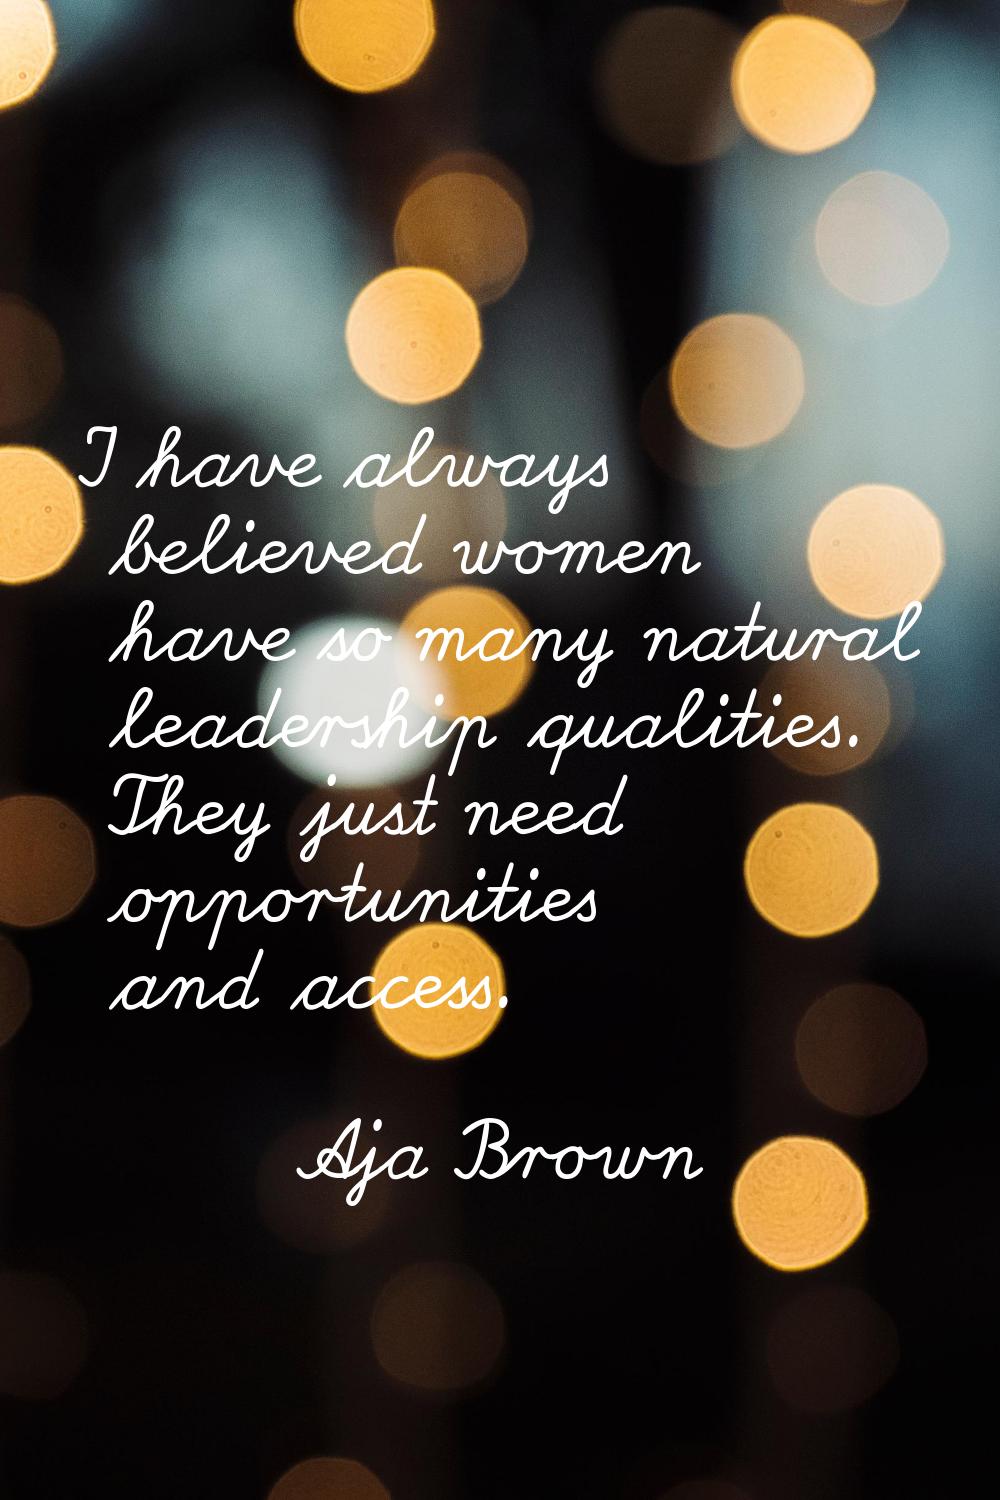 I have always believed women have so many natural leadership qualities. They just need opportunitie